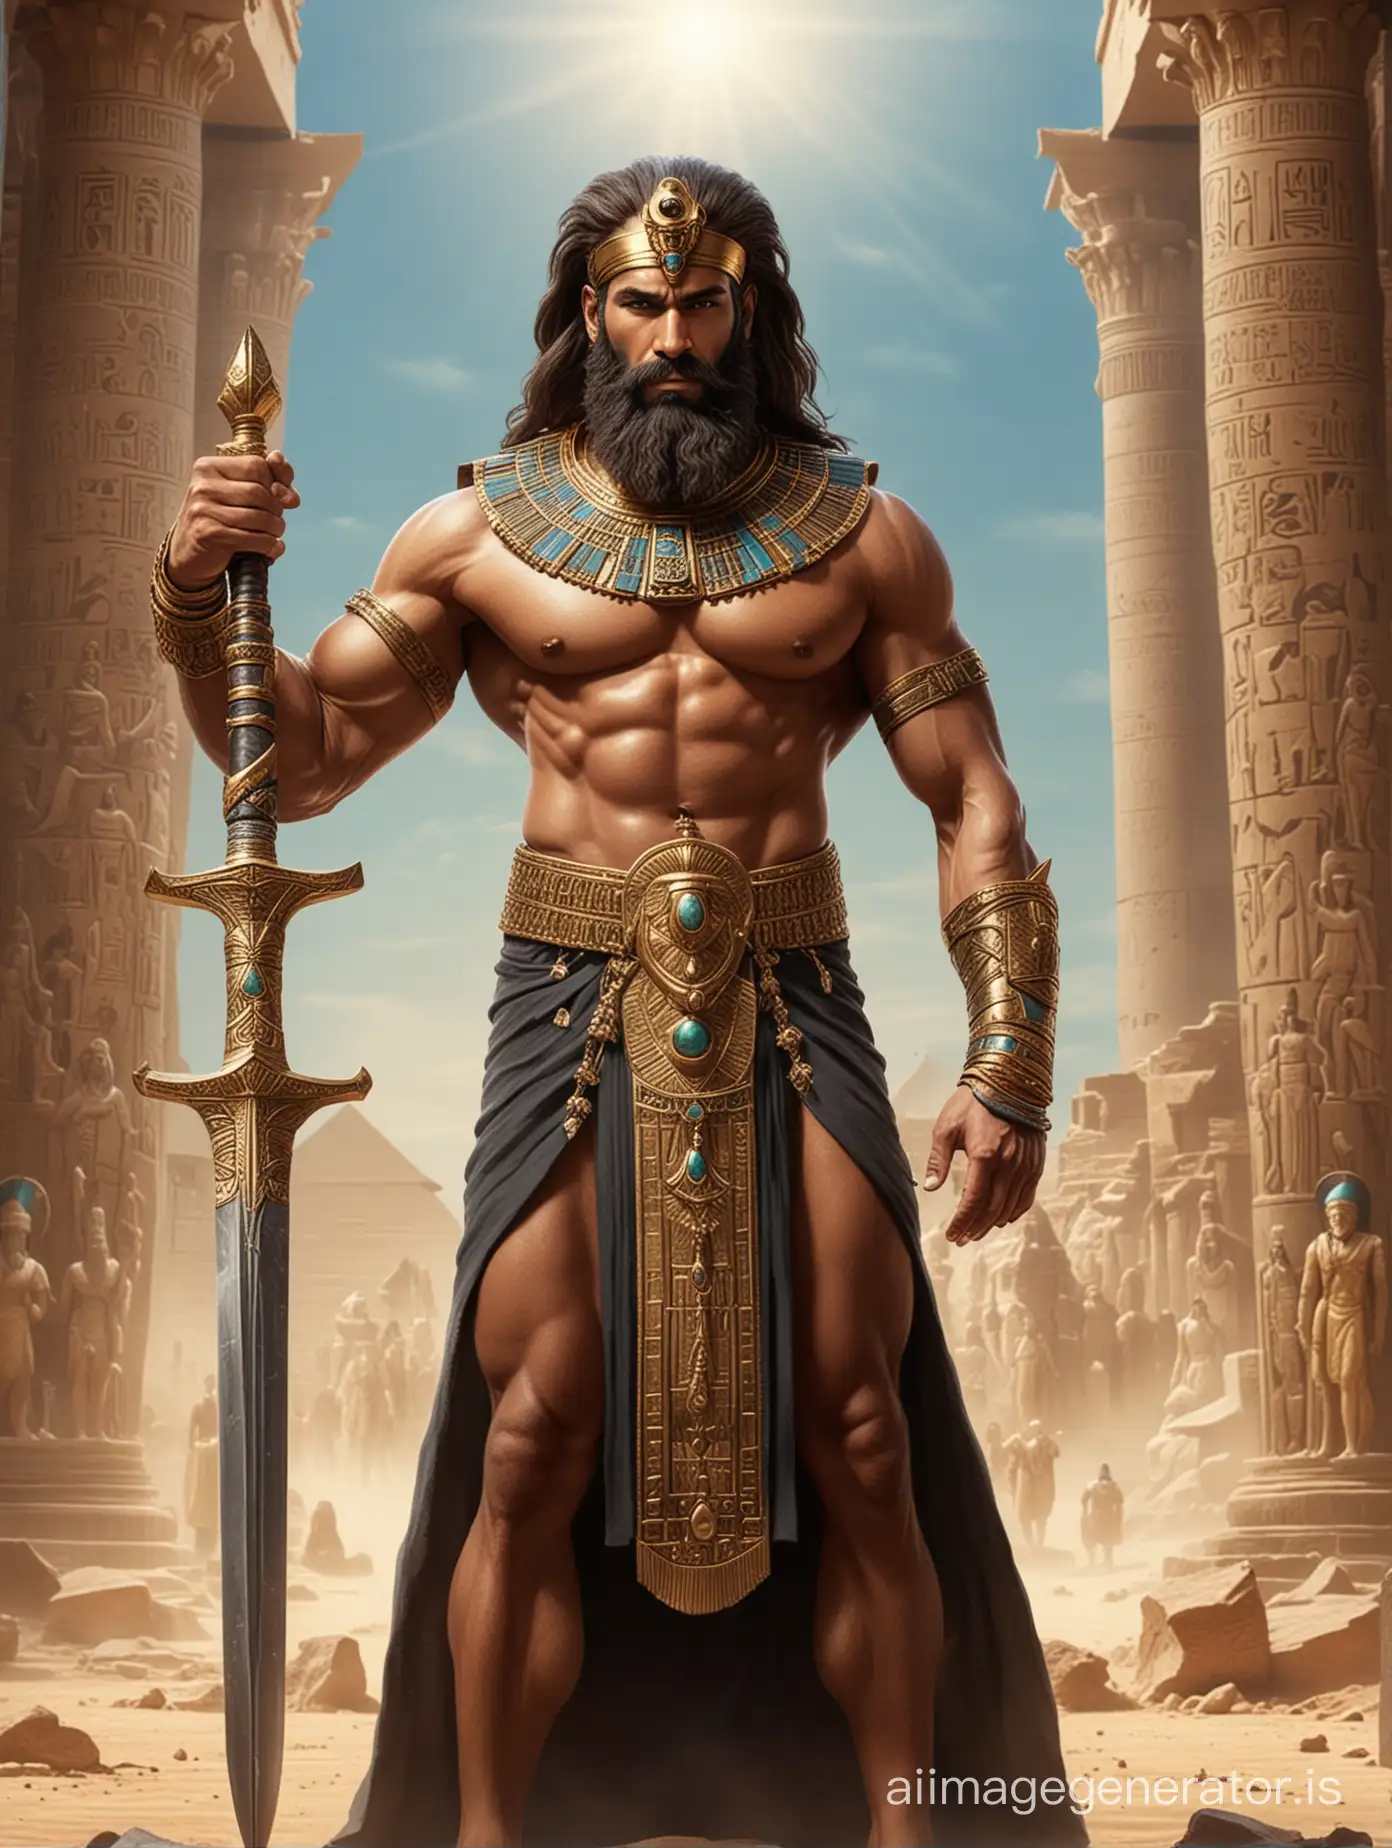 Ancient Egyptian human king with ancient jewellery who is a bodybuilder with huge beard and holding one tall sword and he lifts the sword in the air and a temple background with a big army